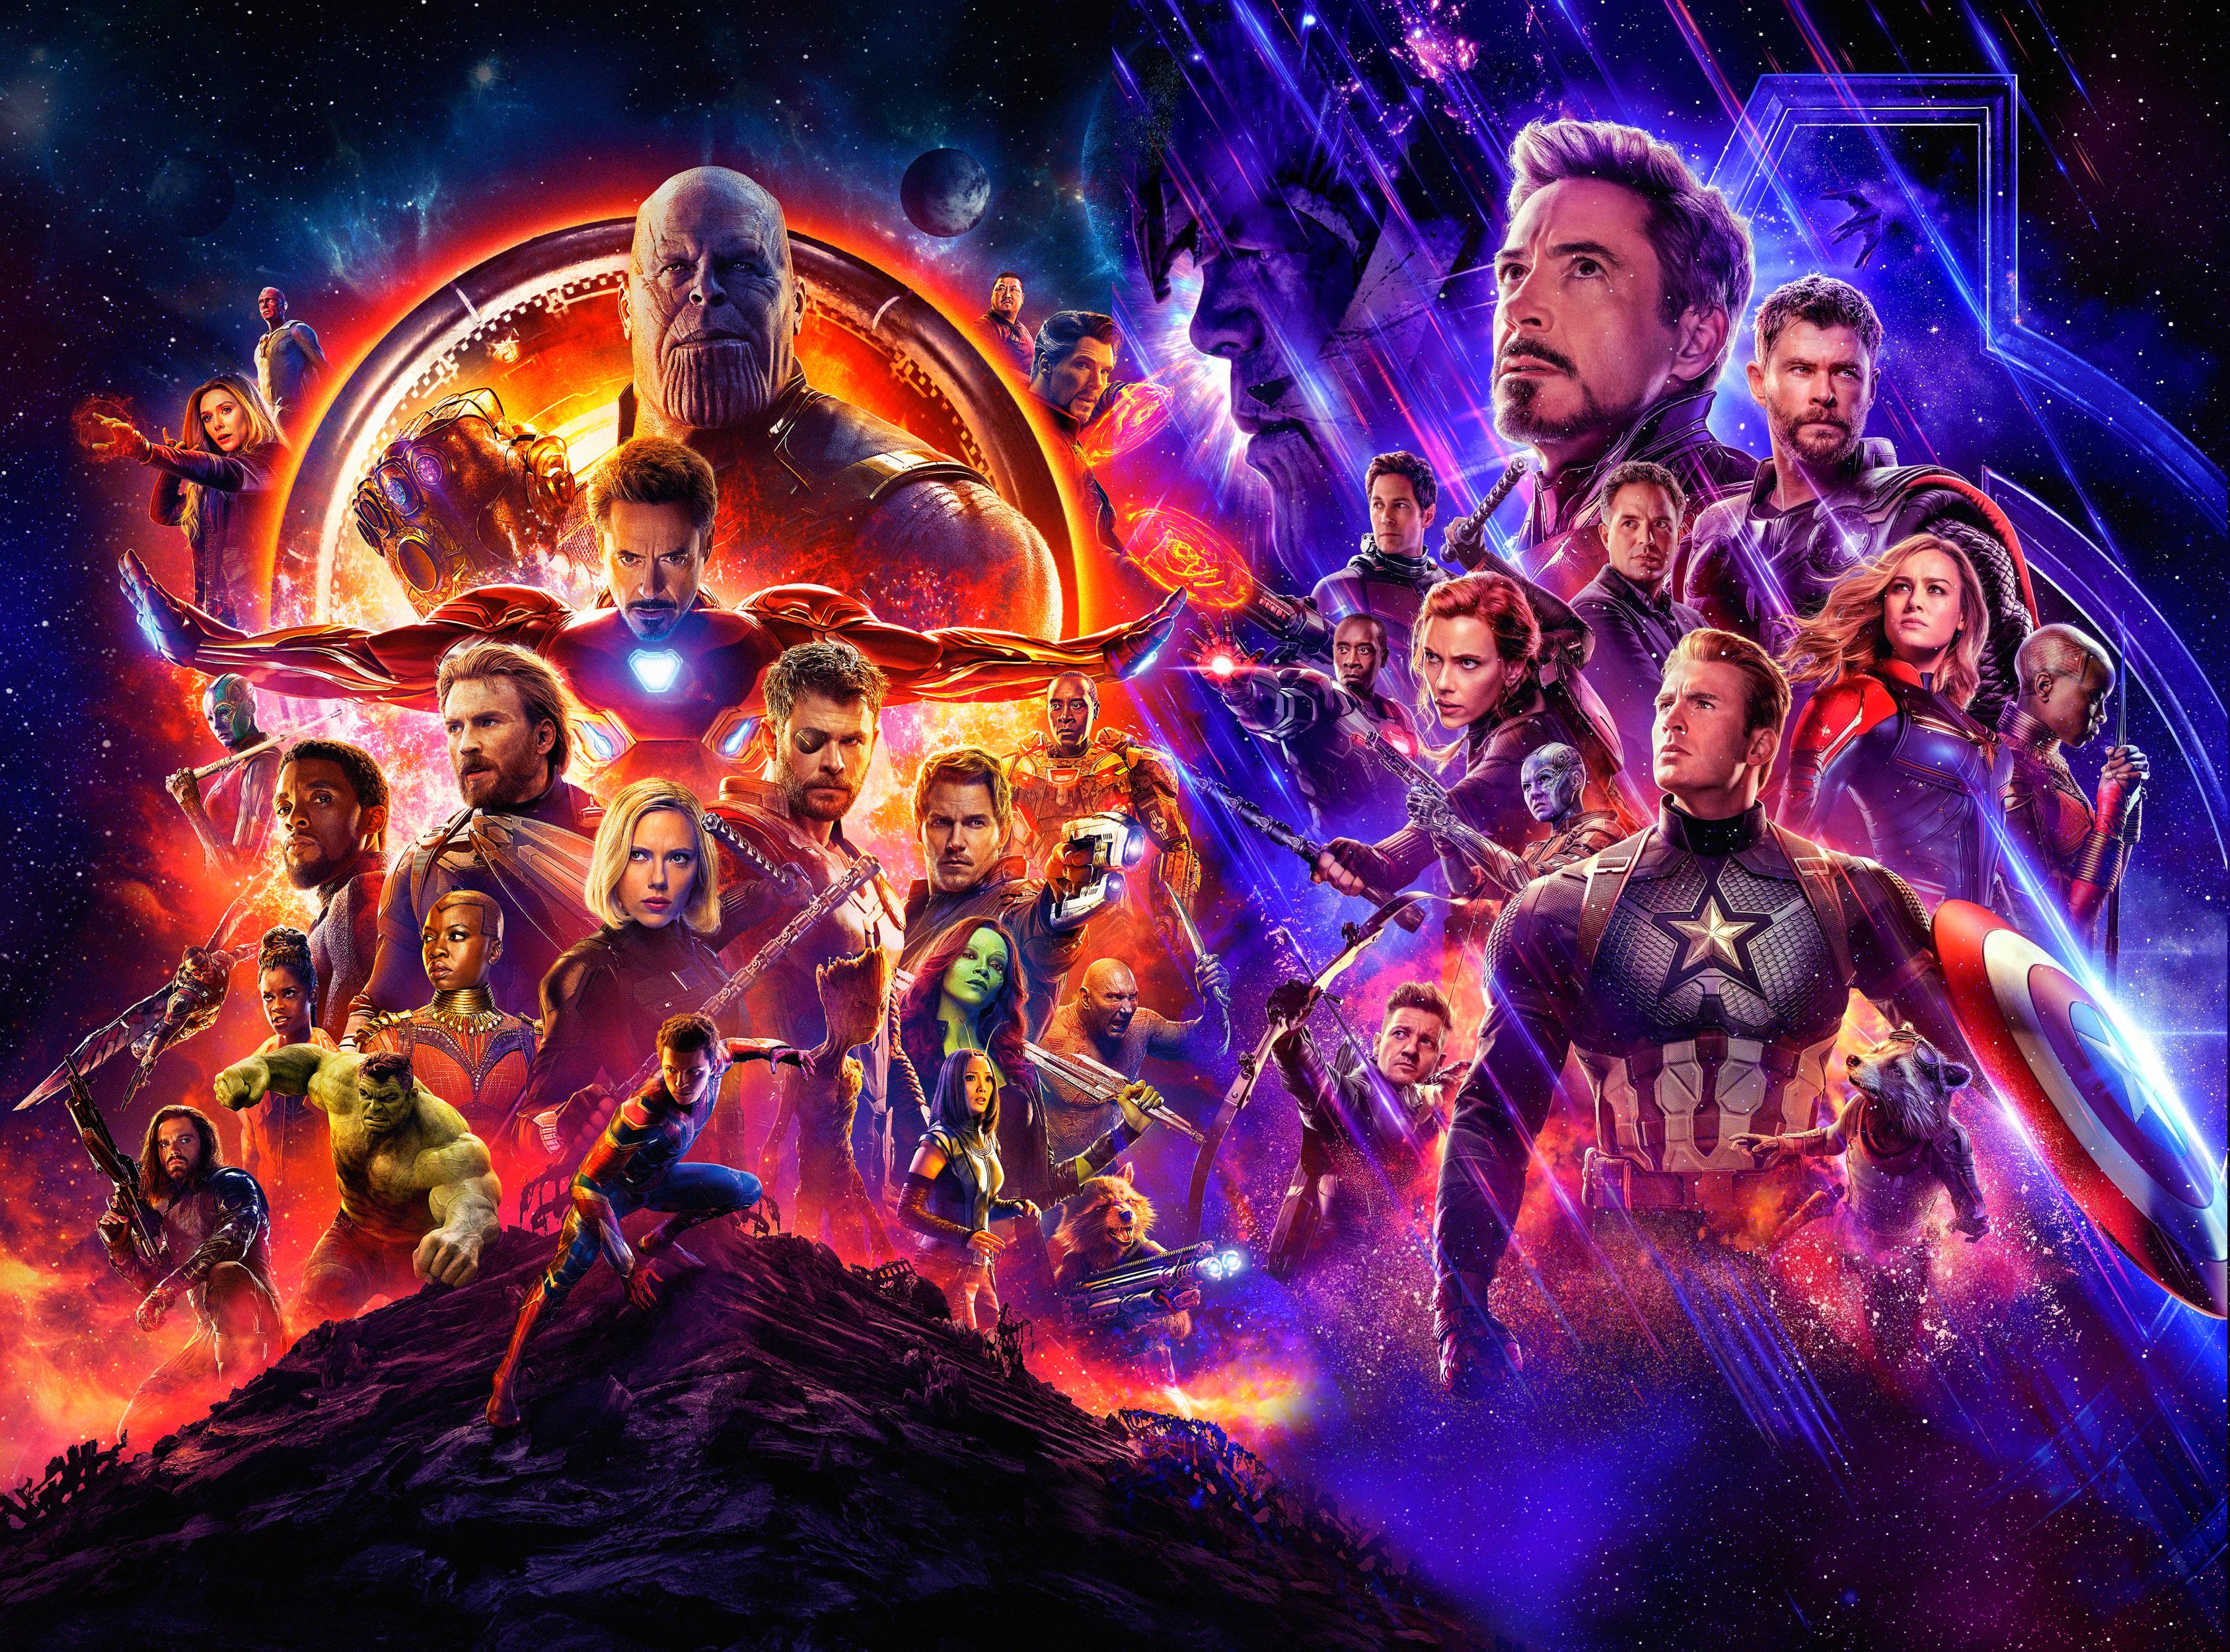 Avengers Infinity War And Endgame Poster, HD Superheroes, 4k Wallpapers, Im...